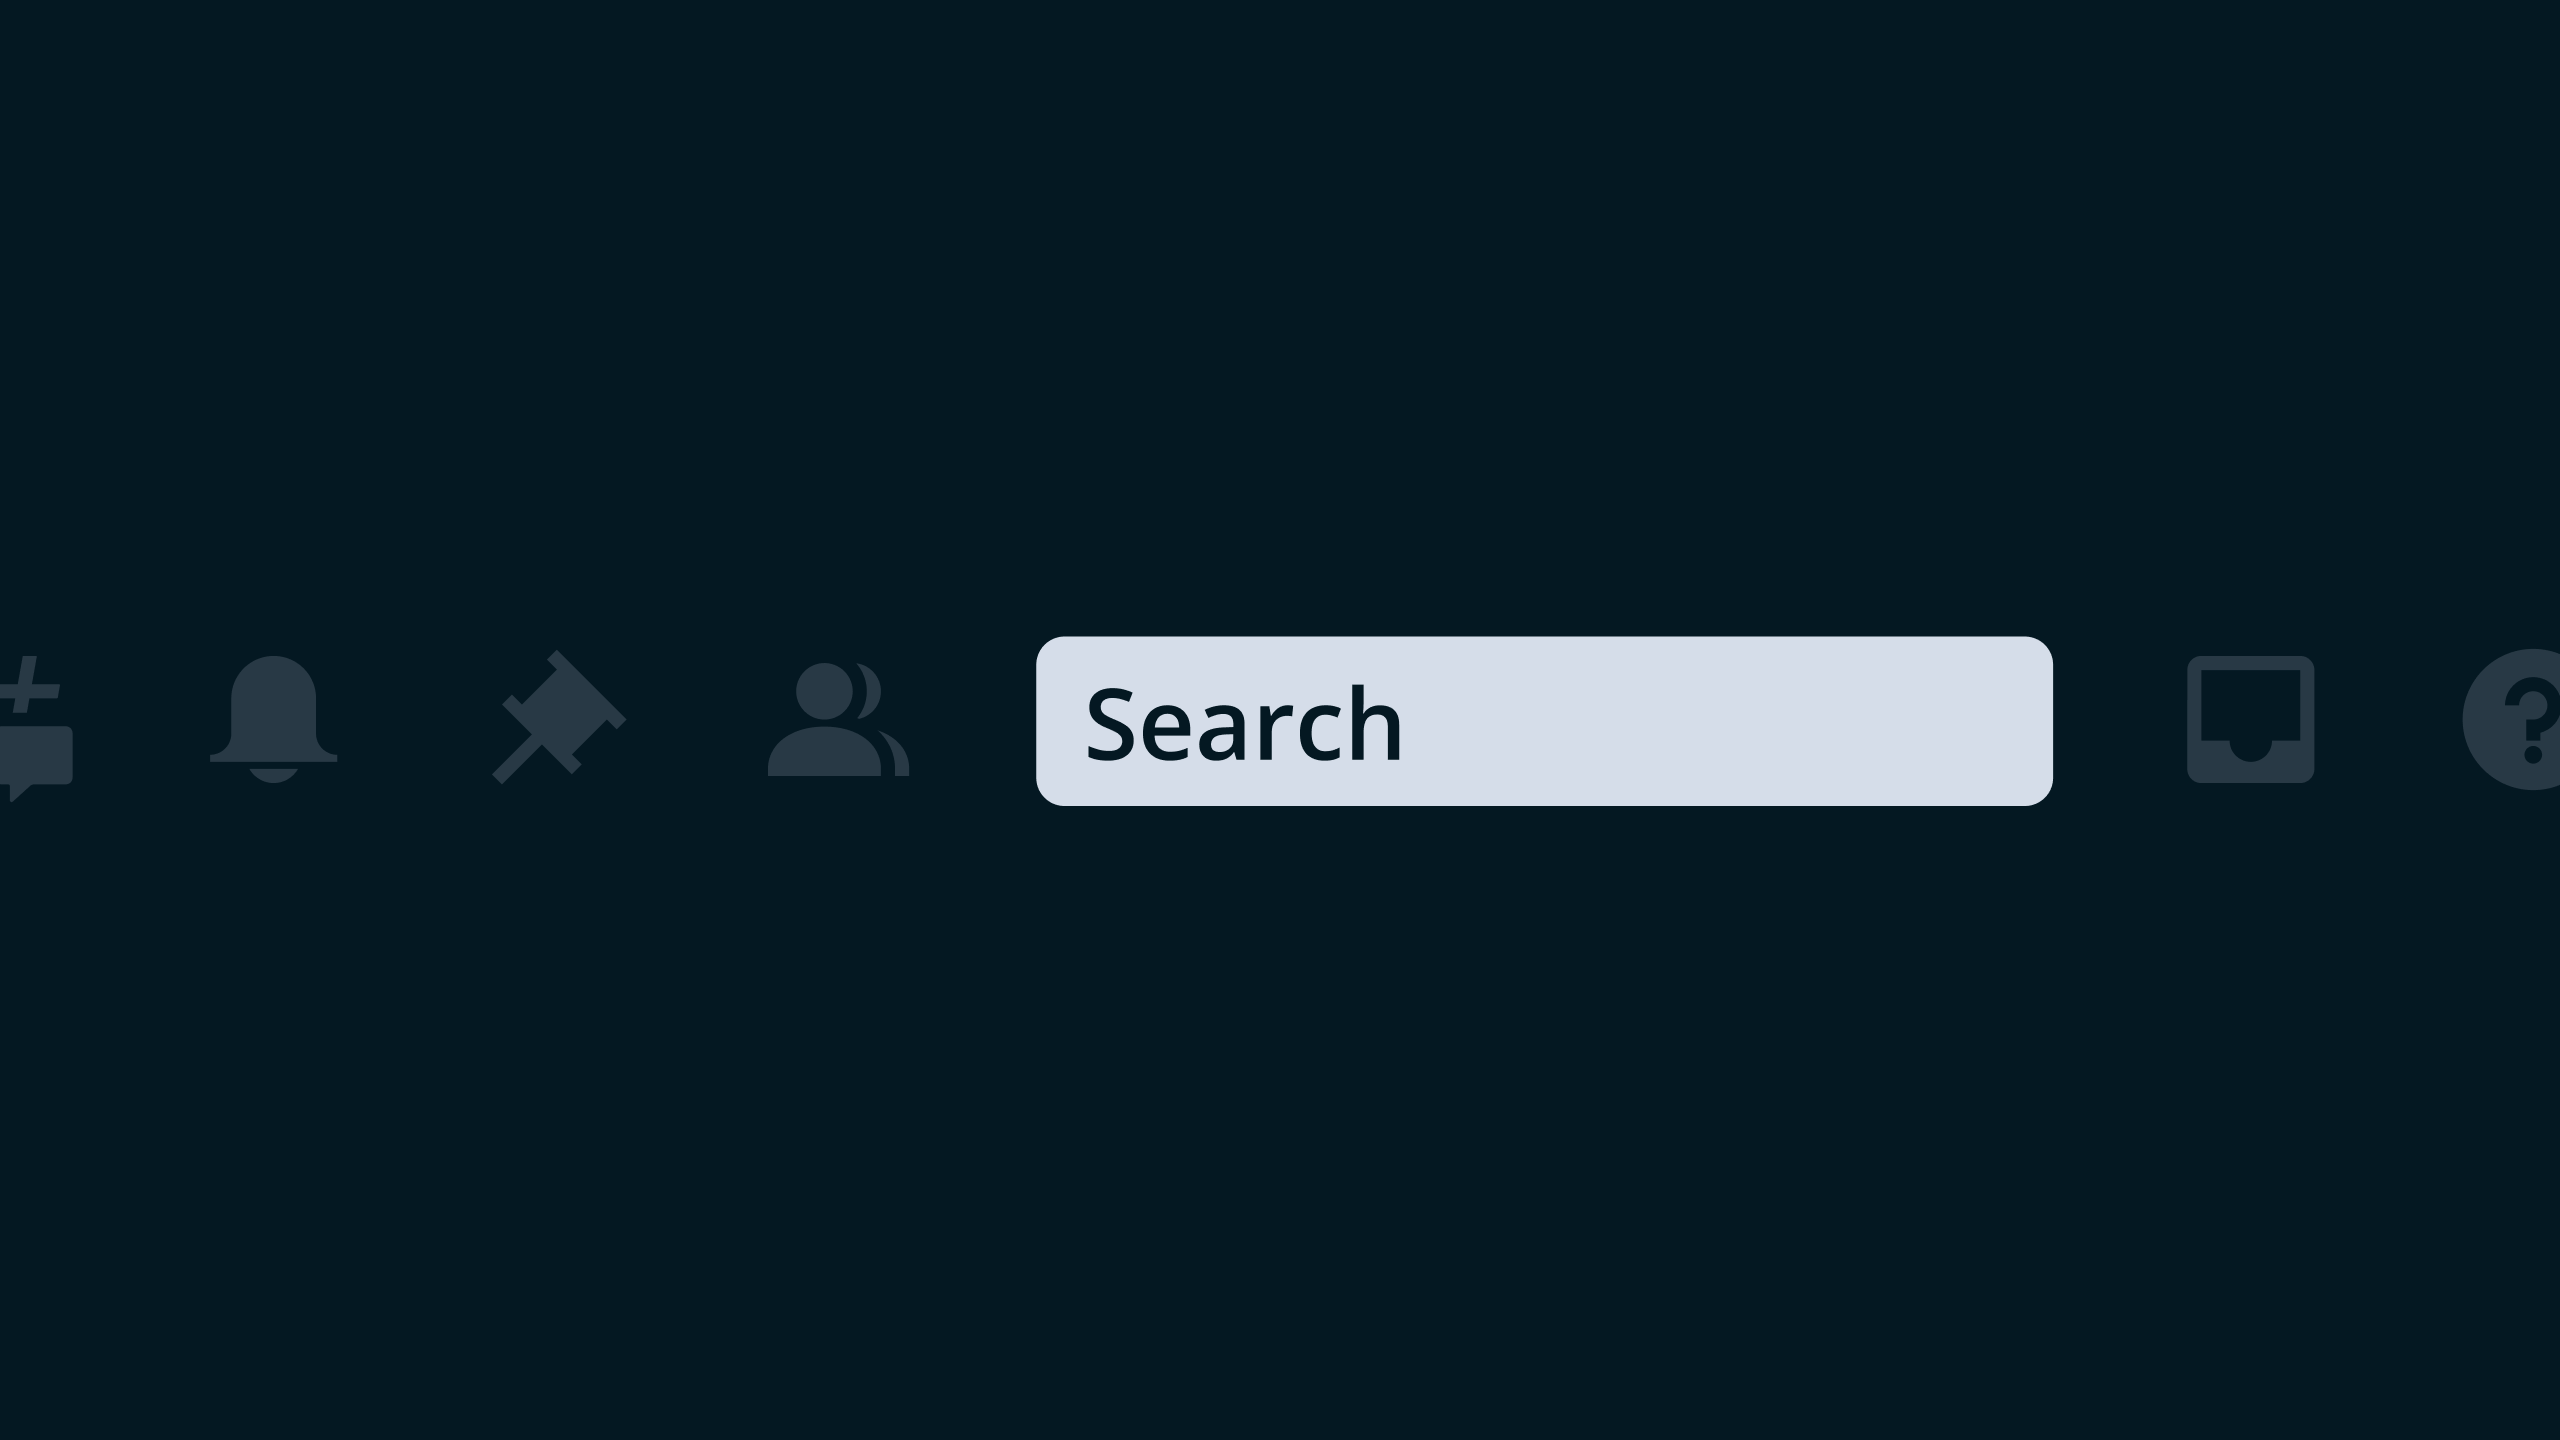 Using the forms plugin to style the search box